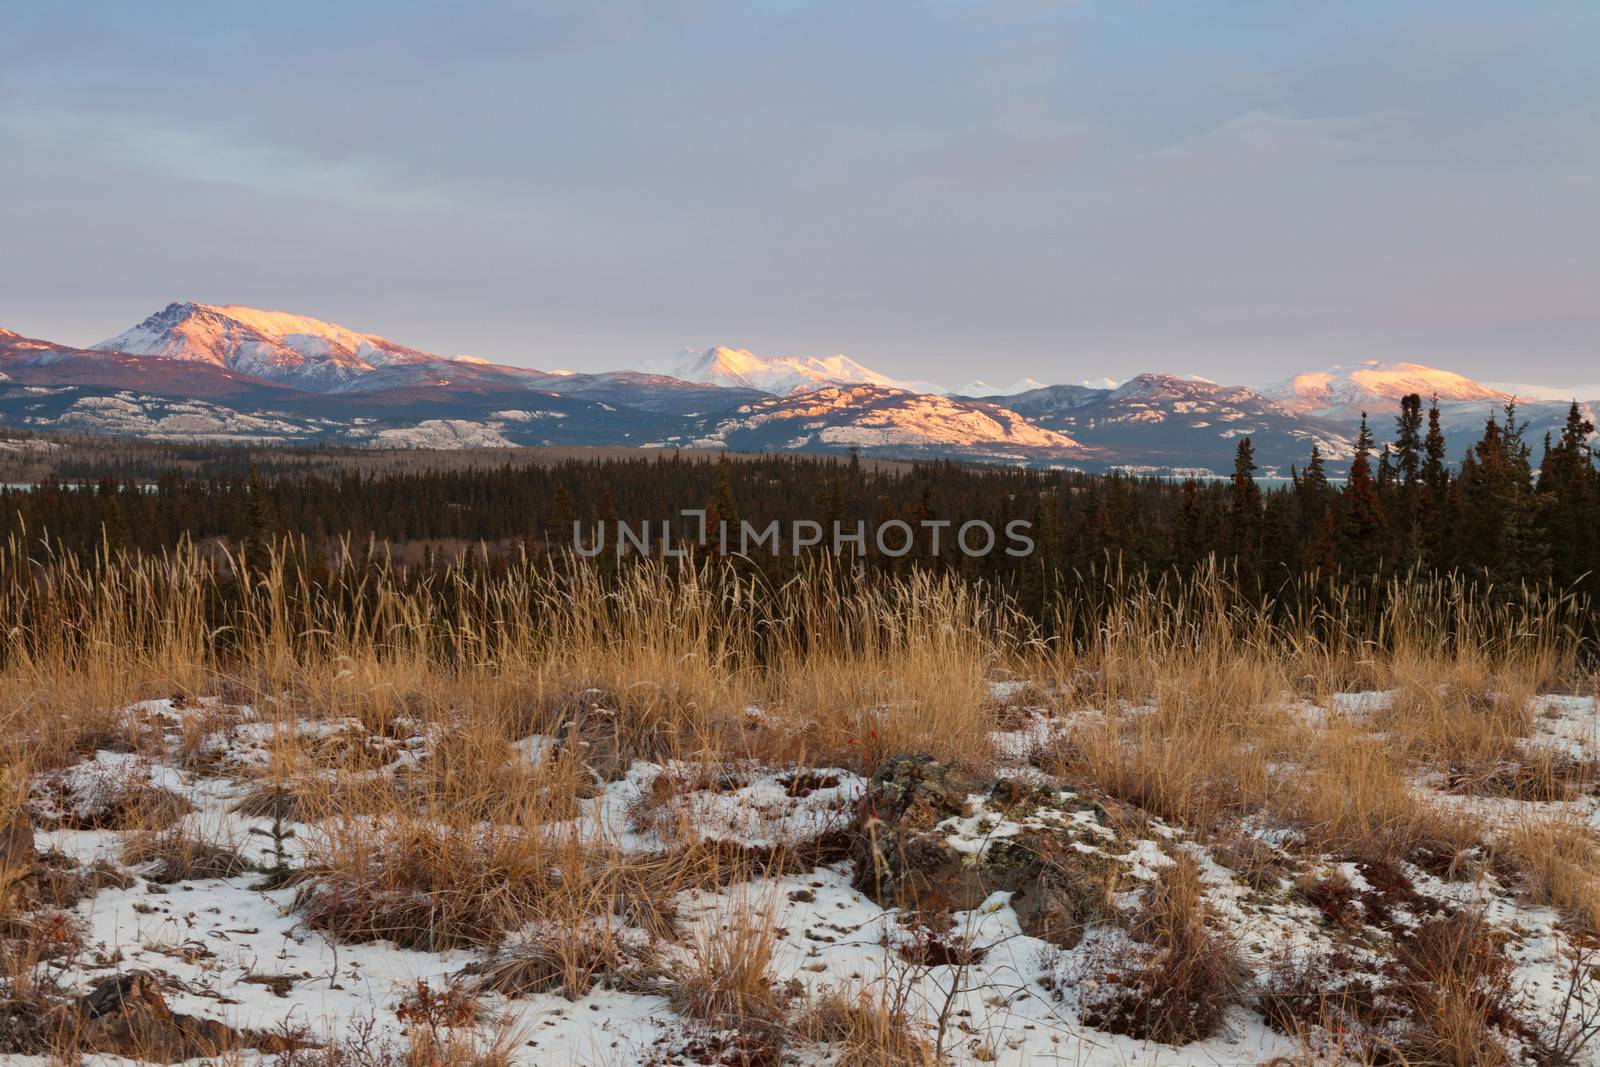 Early winter sunset mountains boreal forest taiga wilderness landscape of the Yukon Territory, Canada